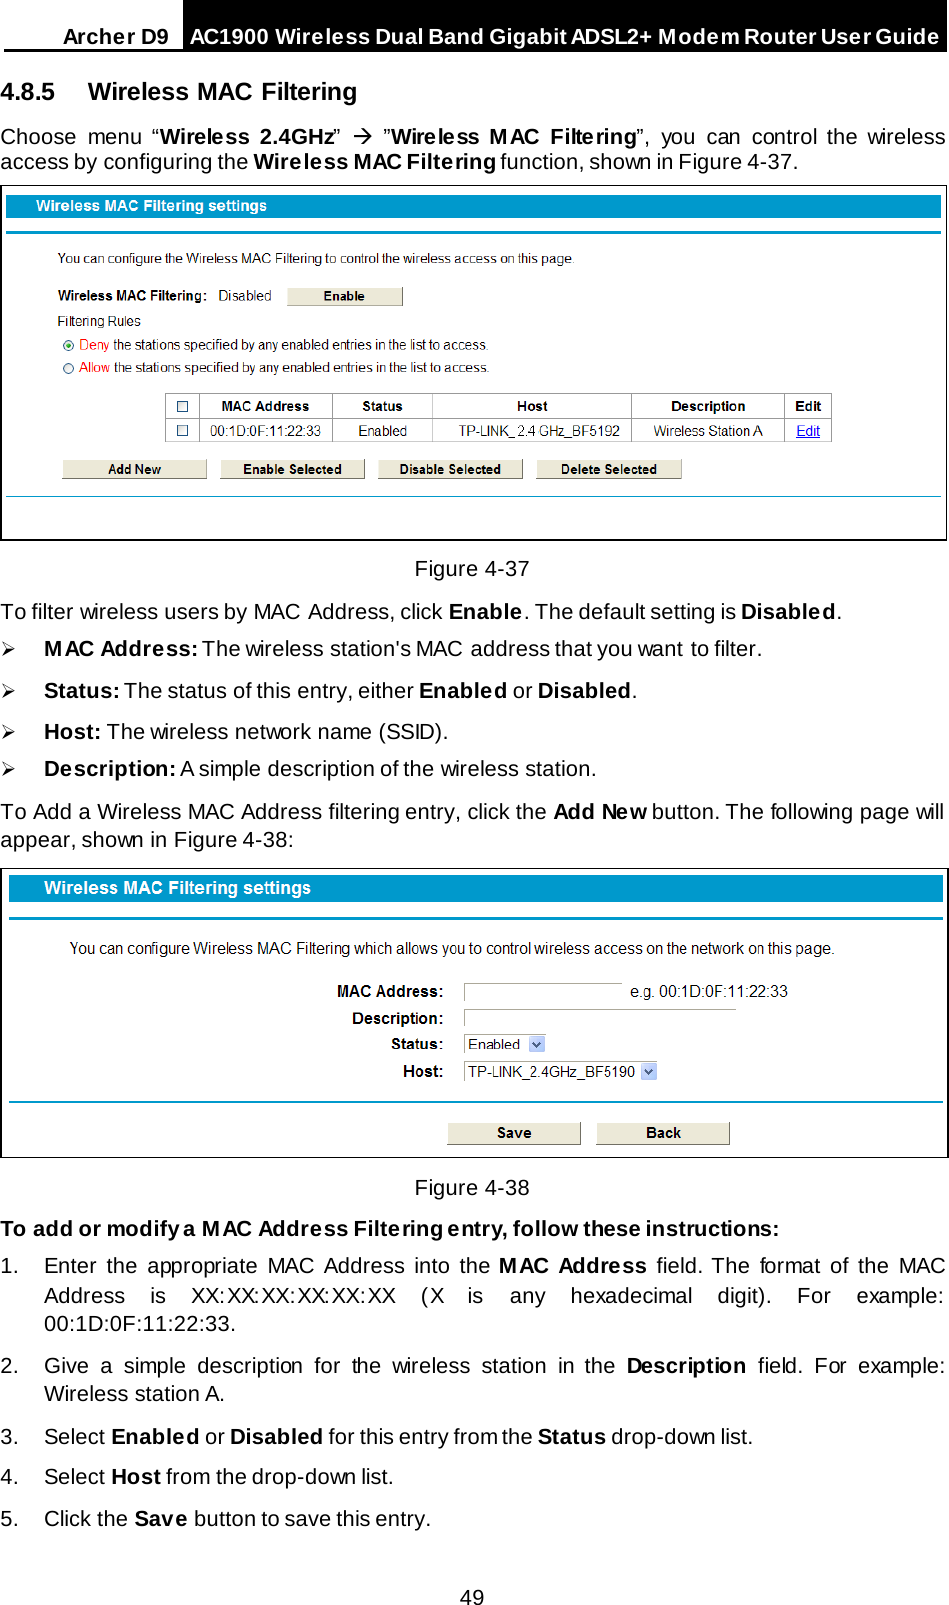 Arche r D9 AC1900 Wireless Dual Band Gigabit ADSL2+ Modem Router User Guide  4.8.5 Wireless MAC Filtering Choose menu “Wireless 2.4GHz”    ”Wire less M AC Filtering”, you can control the wireless access by configuring the Wireless MAC Filtering function, shown in Figure 4-37.  Figure 4-37 To filter wireless users by MAC Address, click Enable. The default setting is Disabled.  M AC Addre ss: The wireless station&apos;s MAC address that you want to filter.    Status: The status of this entry, either Enabled or Disabled.  Host: The wireless network name (SSID).  Description: A simple description of the wireless station.   To Add a Wireless MAC Address filtering entry, click the Add New button. The following page will appear, shown in Figure 4-38:  Figure 4-38 To add or modify a MAC Address Filtering entry, follow these instructions: 1. Enter the appropriate MAC Address into the M AC Addre ss field. The format of the MAC Address is XX:XX:XX:XX:XX:XX (X is any hexadecimal digit). For example: 00:1D:0F:11:22:33.  2. Give a simple description for the wireless station in the Description field. For example: Wireless station A. 3. Select Enabled or Disabled for this entry from the Status drop-down list. 4. Select Host from the drop-down list. 5. Click the Save button to save this entry. 49 